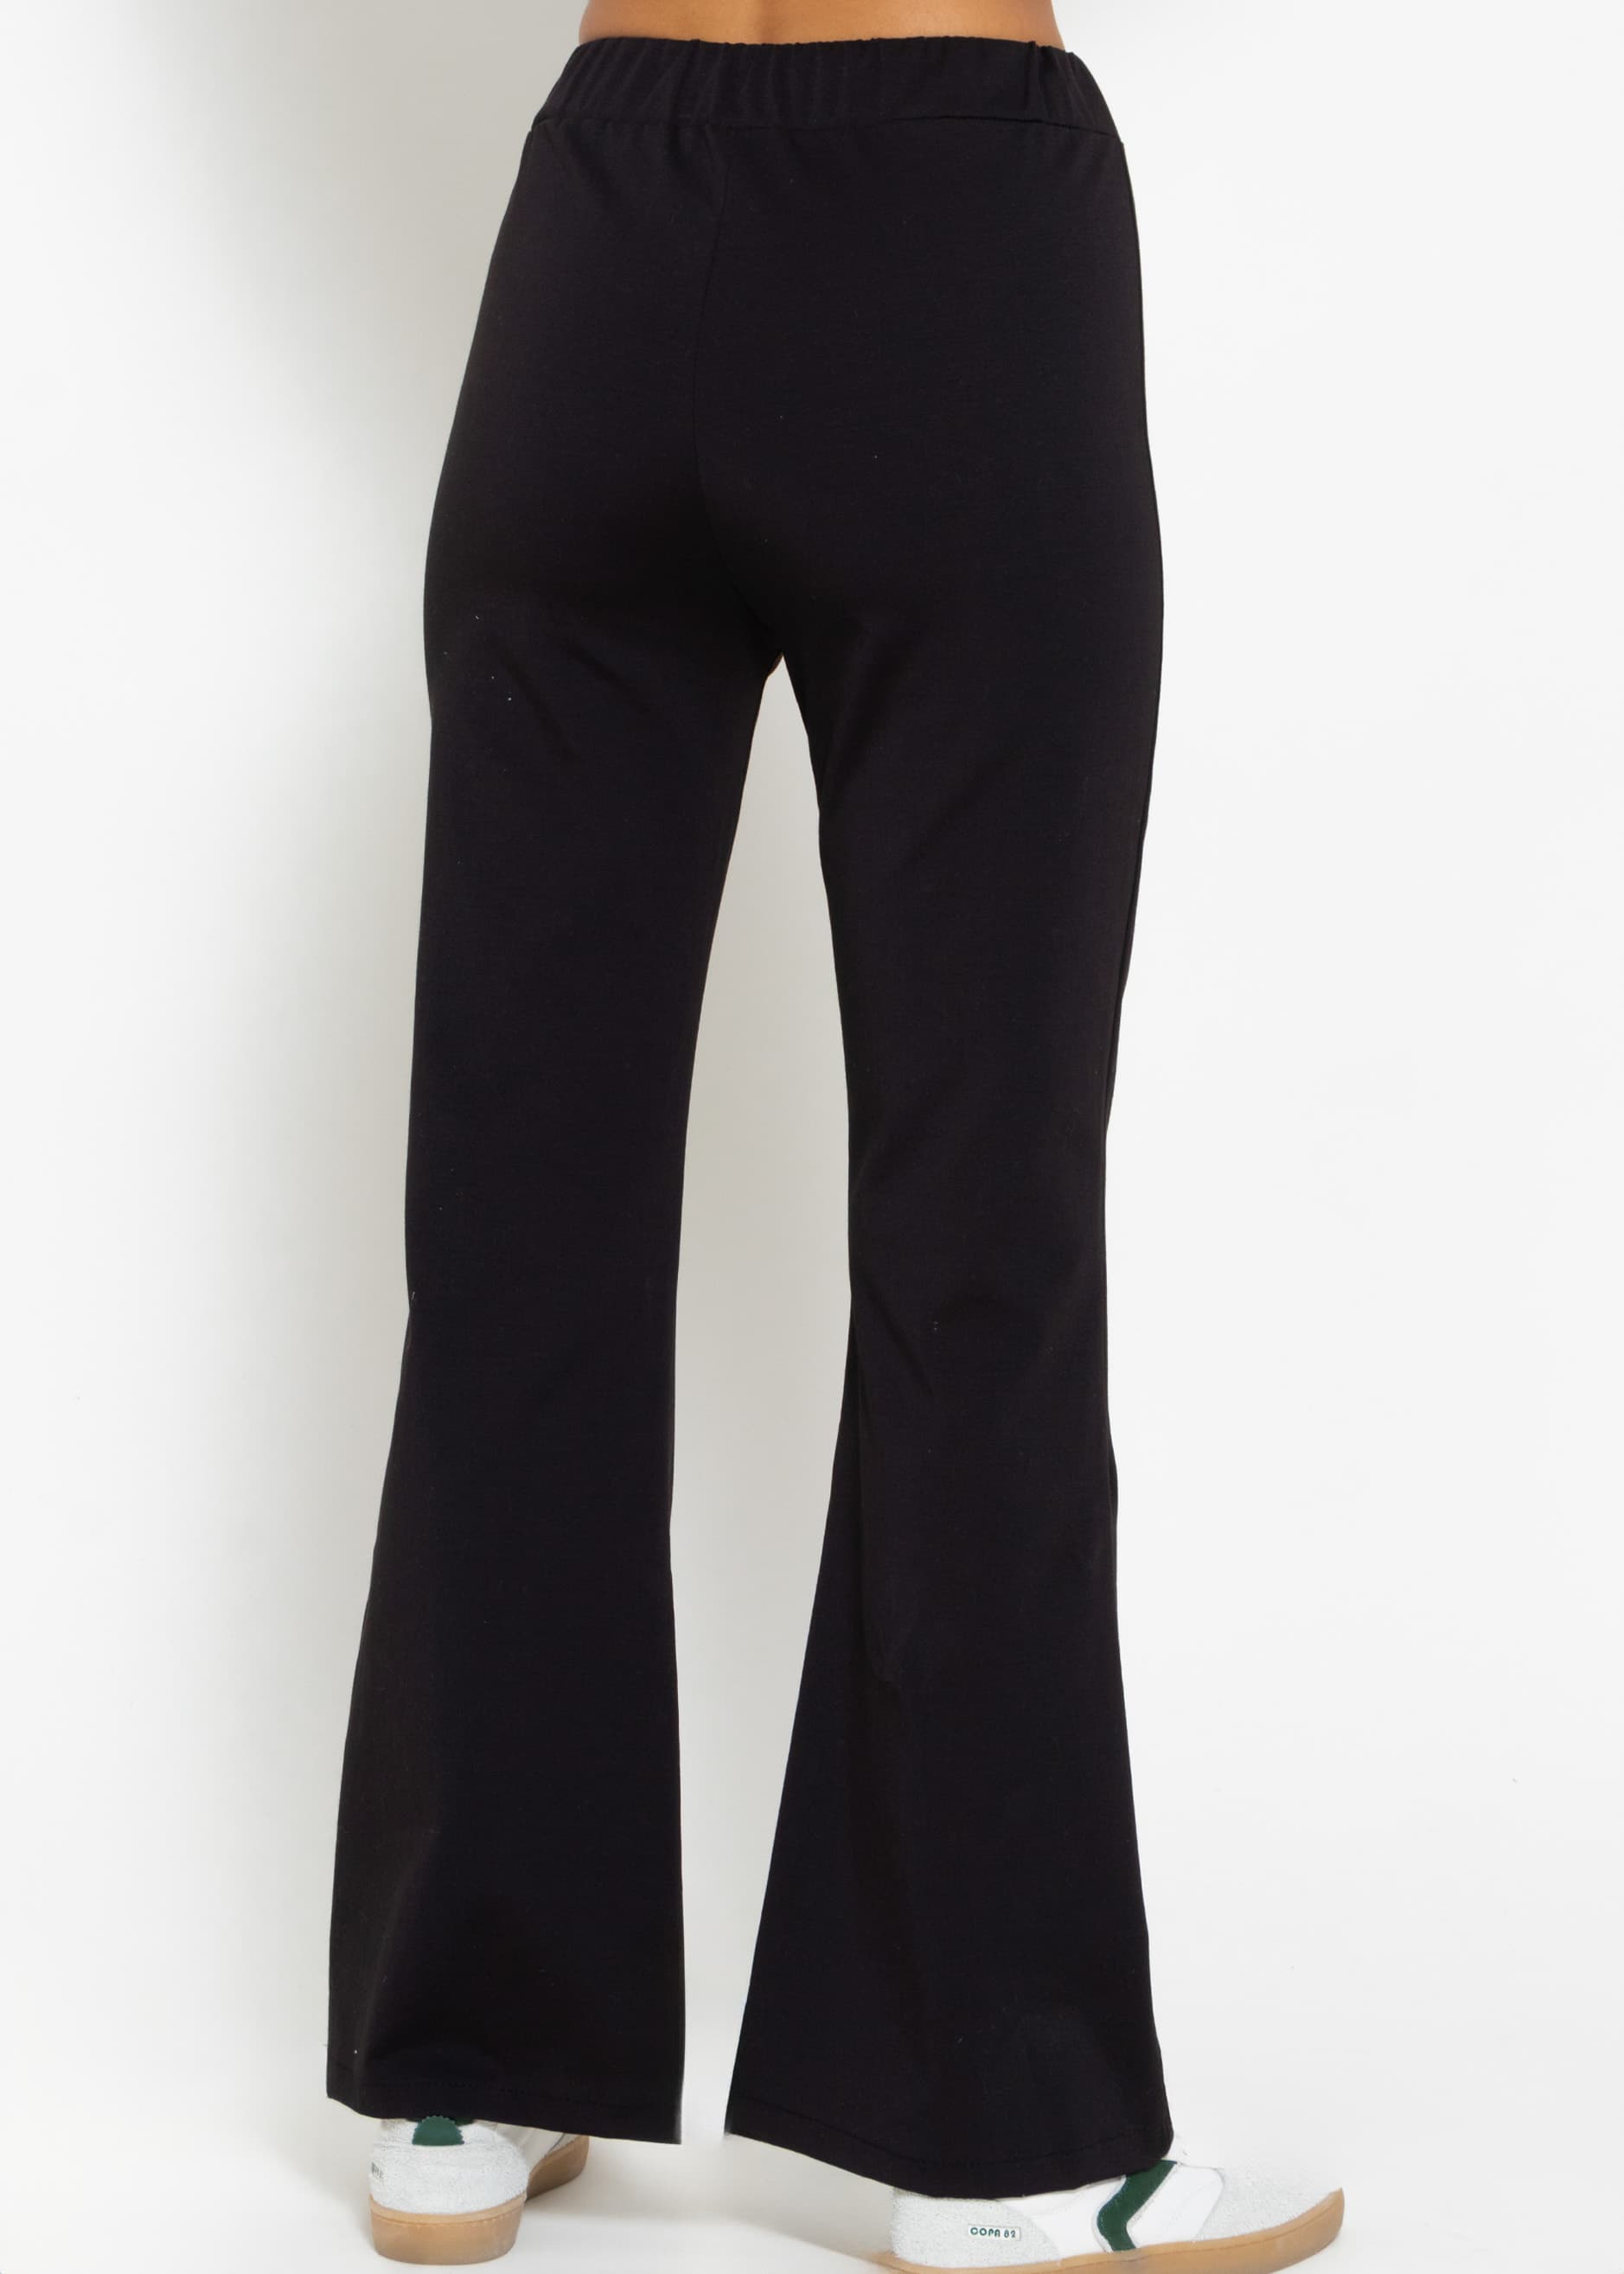 Flared jersey pants